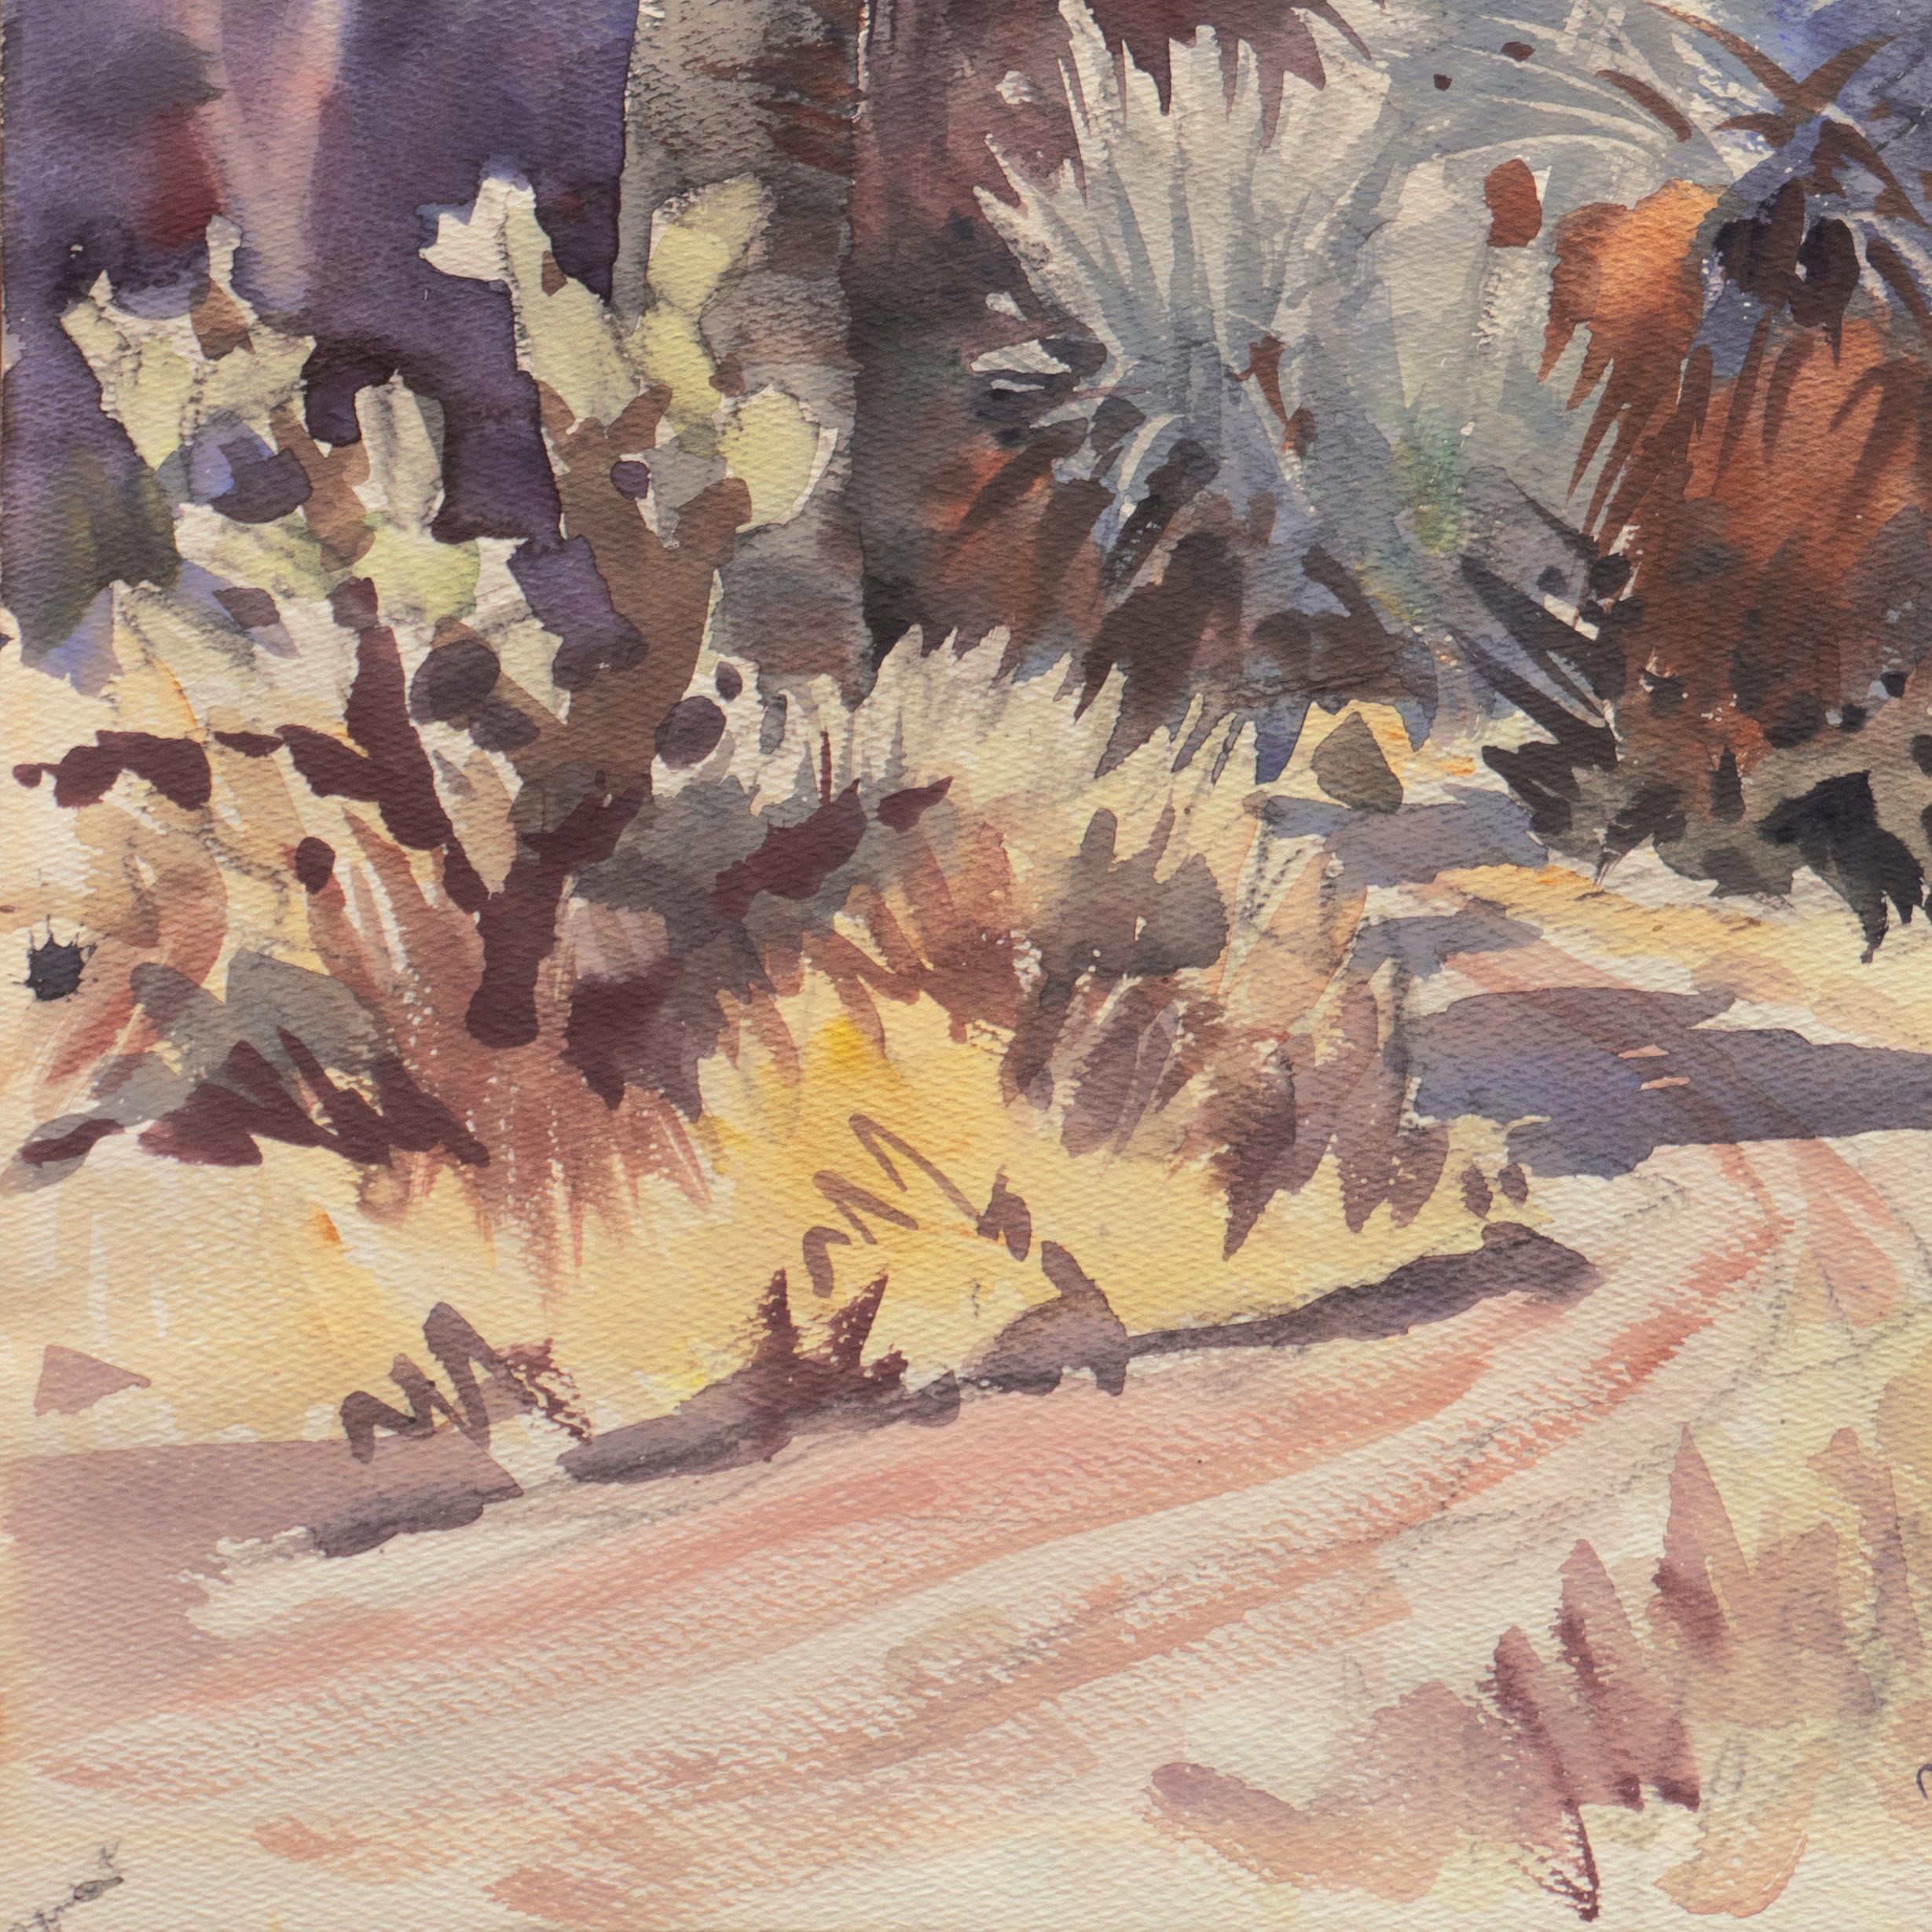 Signed lower right, 'R. Ledesma' for Ralph Ledesma (American, 1910-1993) and painted circa 1950.

An Impressionist style watercolor showing a view of a Southern California garden with palm trees and agave and other desert plants. 

Ralph Ledesma was